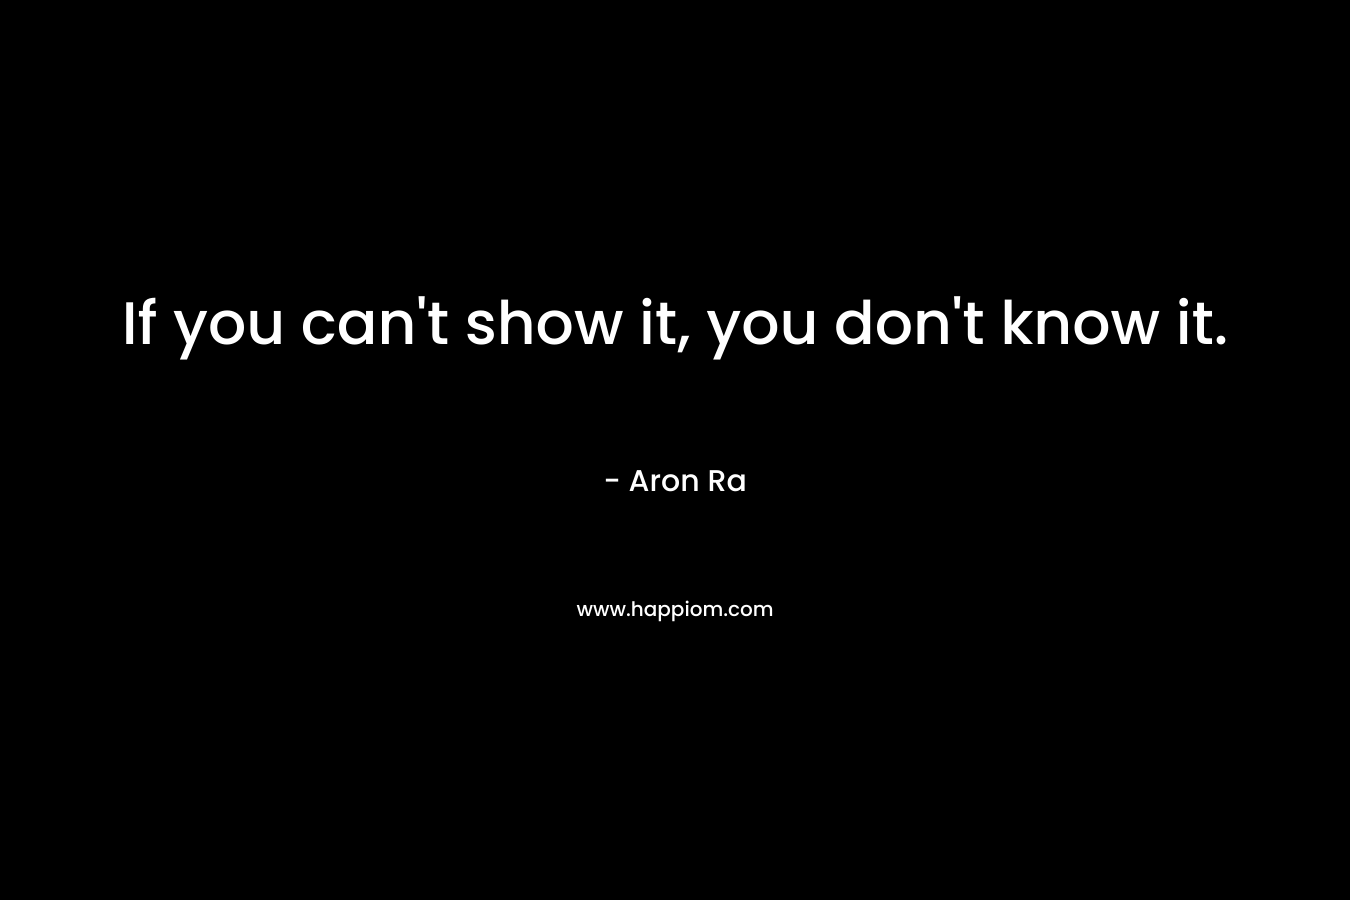 If you can't show it, you don't know it.